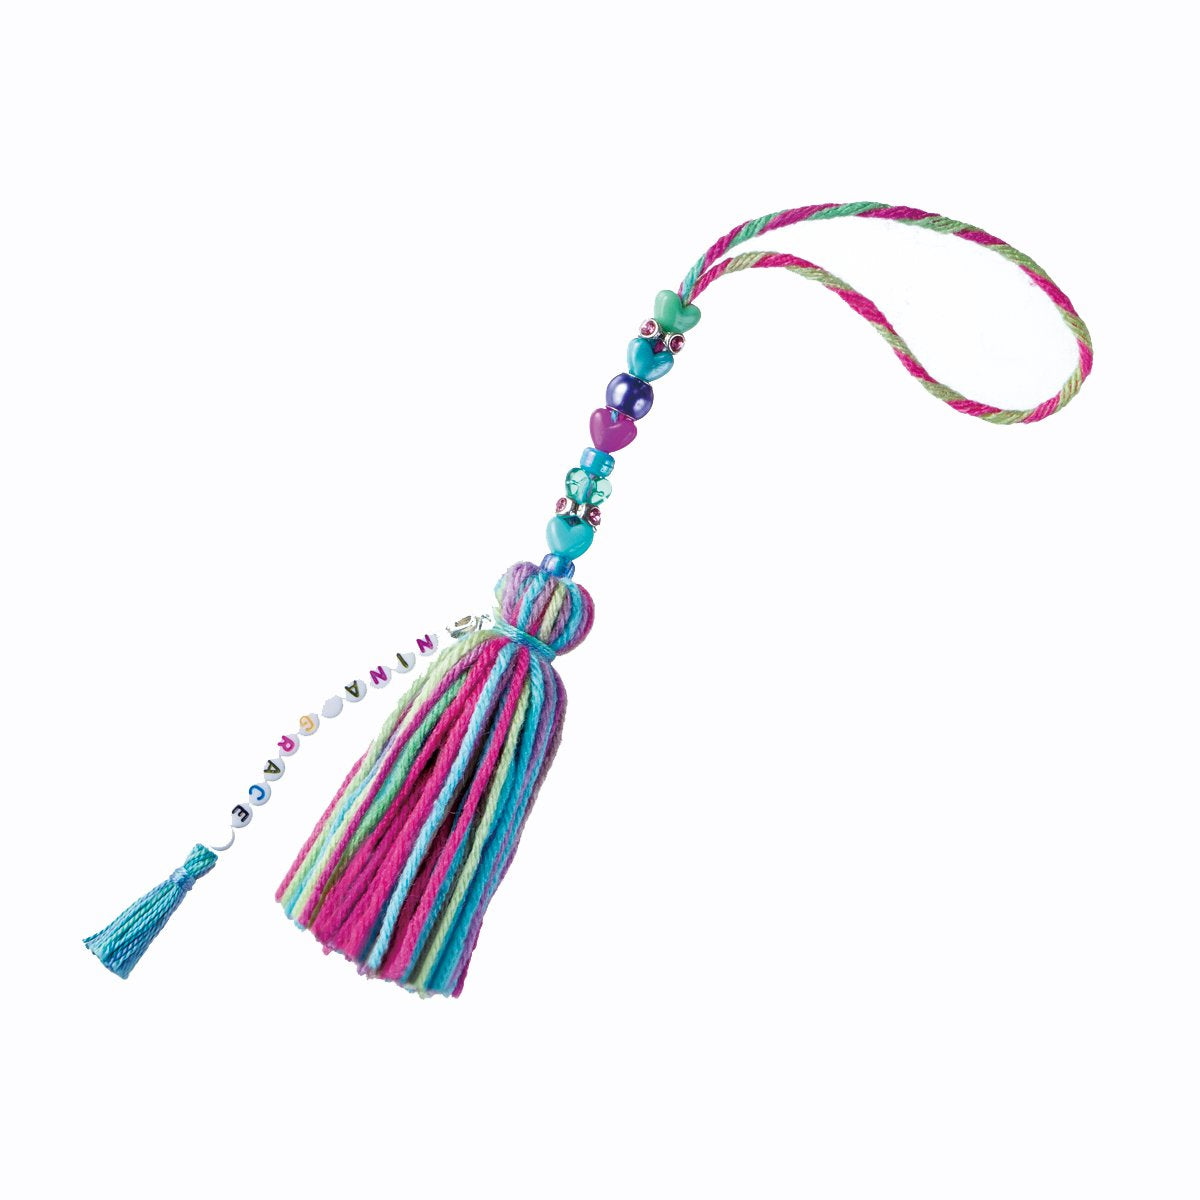 Tassel Maker and Thread Twister from Clover: tutorial, review and